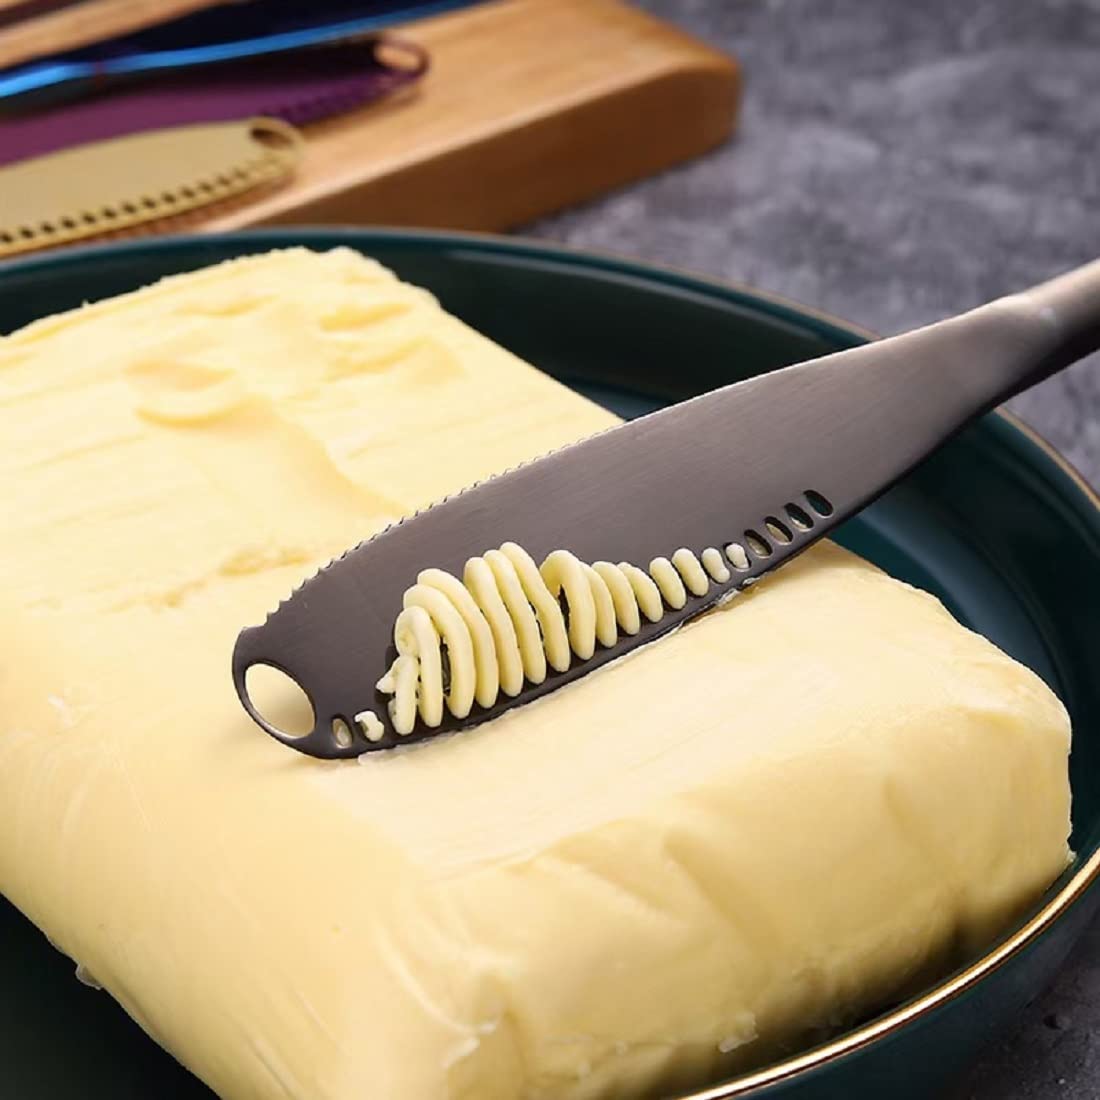 Stainless steel butter knife